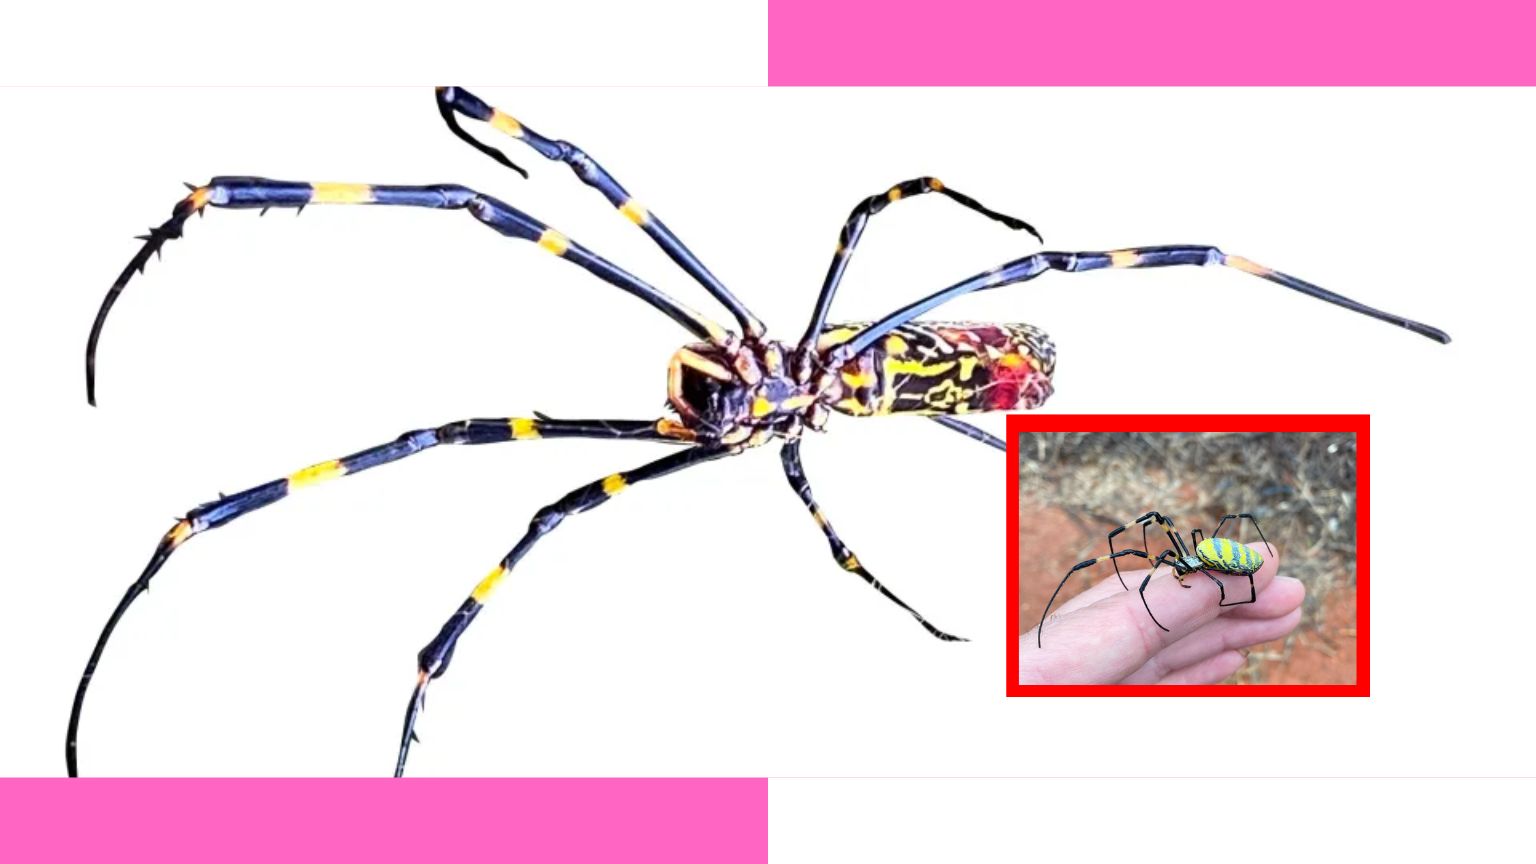 Joro spiders, are joro spiders poisonous, how to get rid of joro spiders, joro spiders in georgia, do joro spiders bite,are joro spiders poisonous to humans, are joro spiders dangerous, are joro spiders venomous, joro spiders georgia, how big are joro spiders, do joro spiders bite humans, joro spiders size, how to get rid of joro spiders, what kills joro spiders, what do joro spiders eat, Unlocking the Mystery: Joro Spiders and Their Invasive Spread in the US,